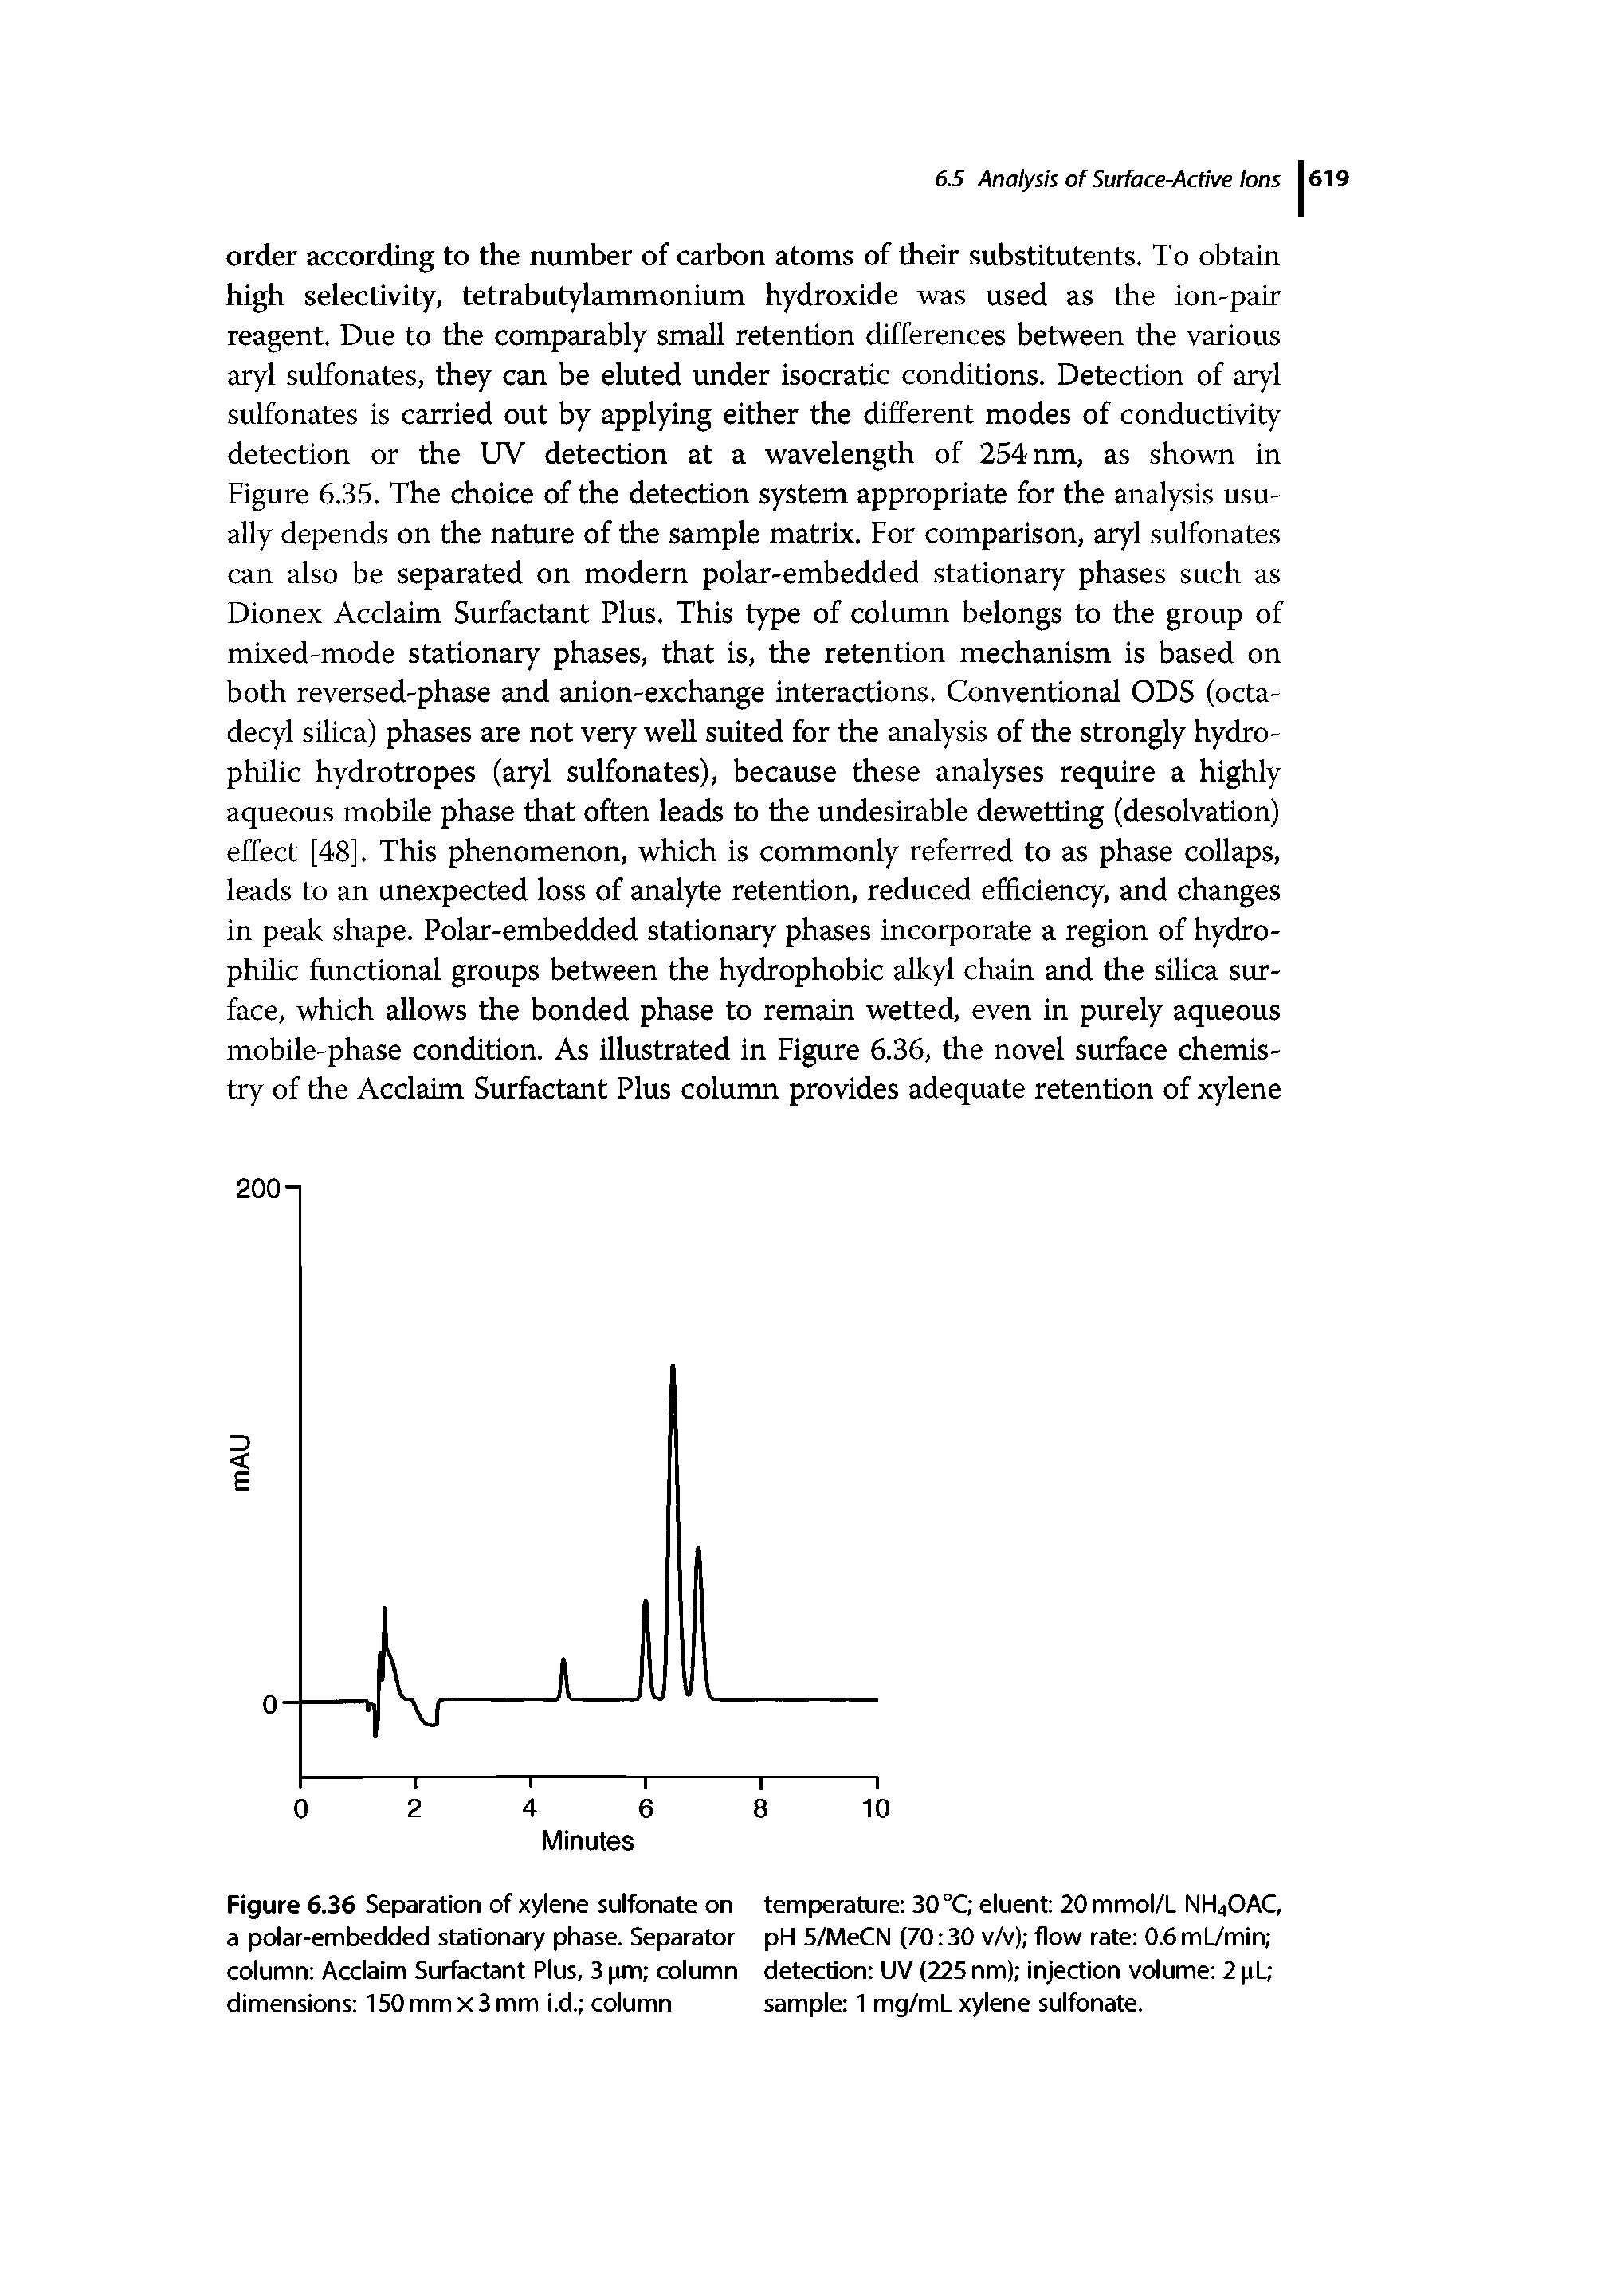 Figure 6.36 Separation of xylene sulfonate on a polar-embedded stationary phase. Separator column Acclaim Surfactant Plus, 3 pm column dimensions 150 mm x 3 mm i.d. column...